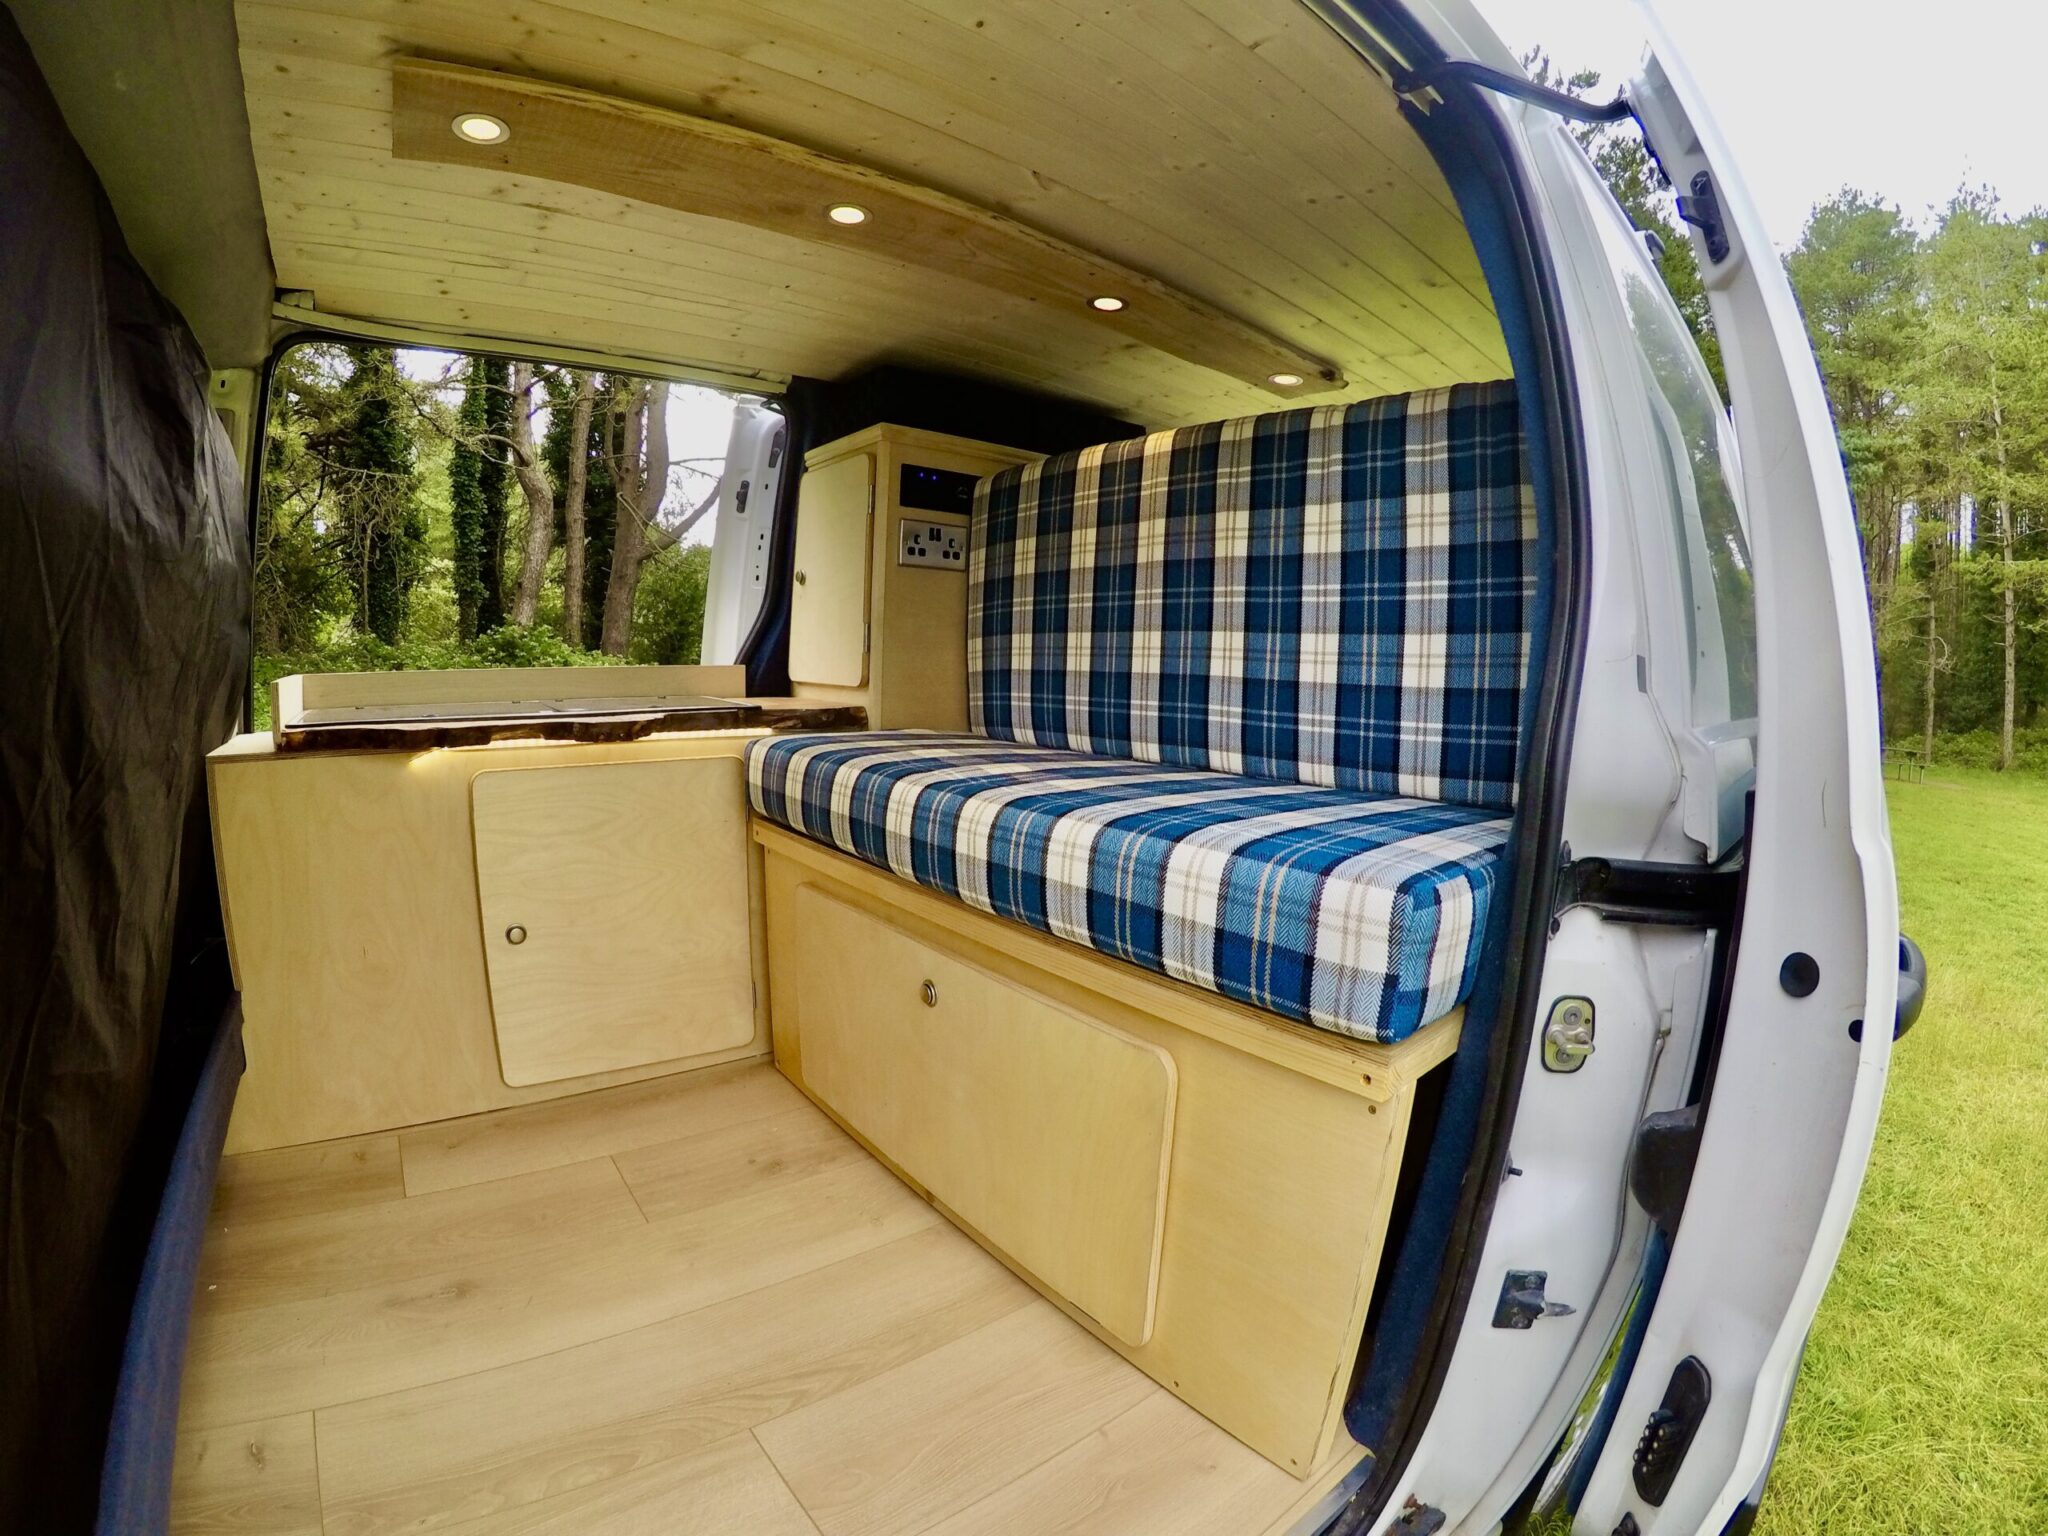 Carpenter's Beautifully Crafted Bespoke Campervan ⋆ Quirky Campers